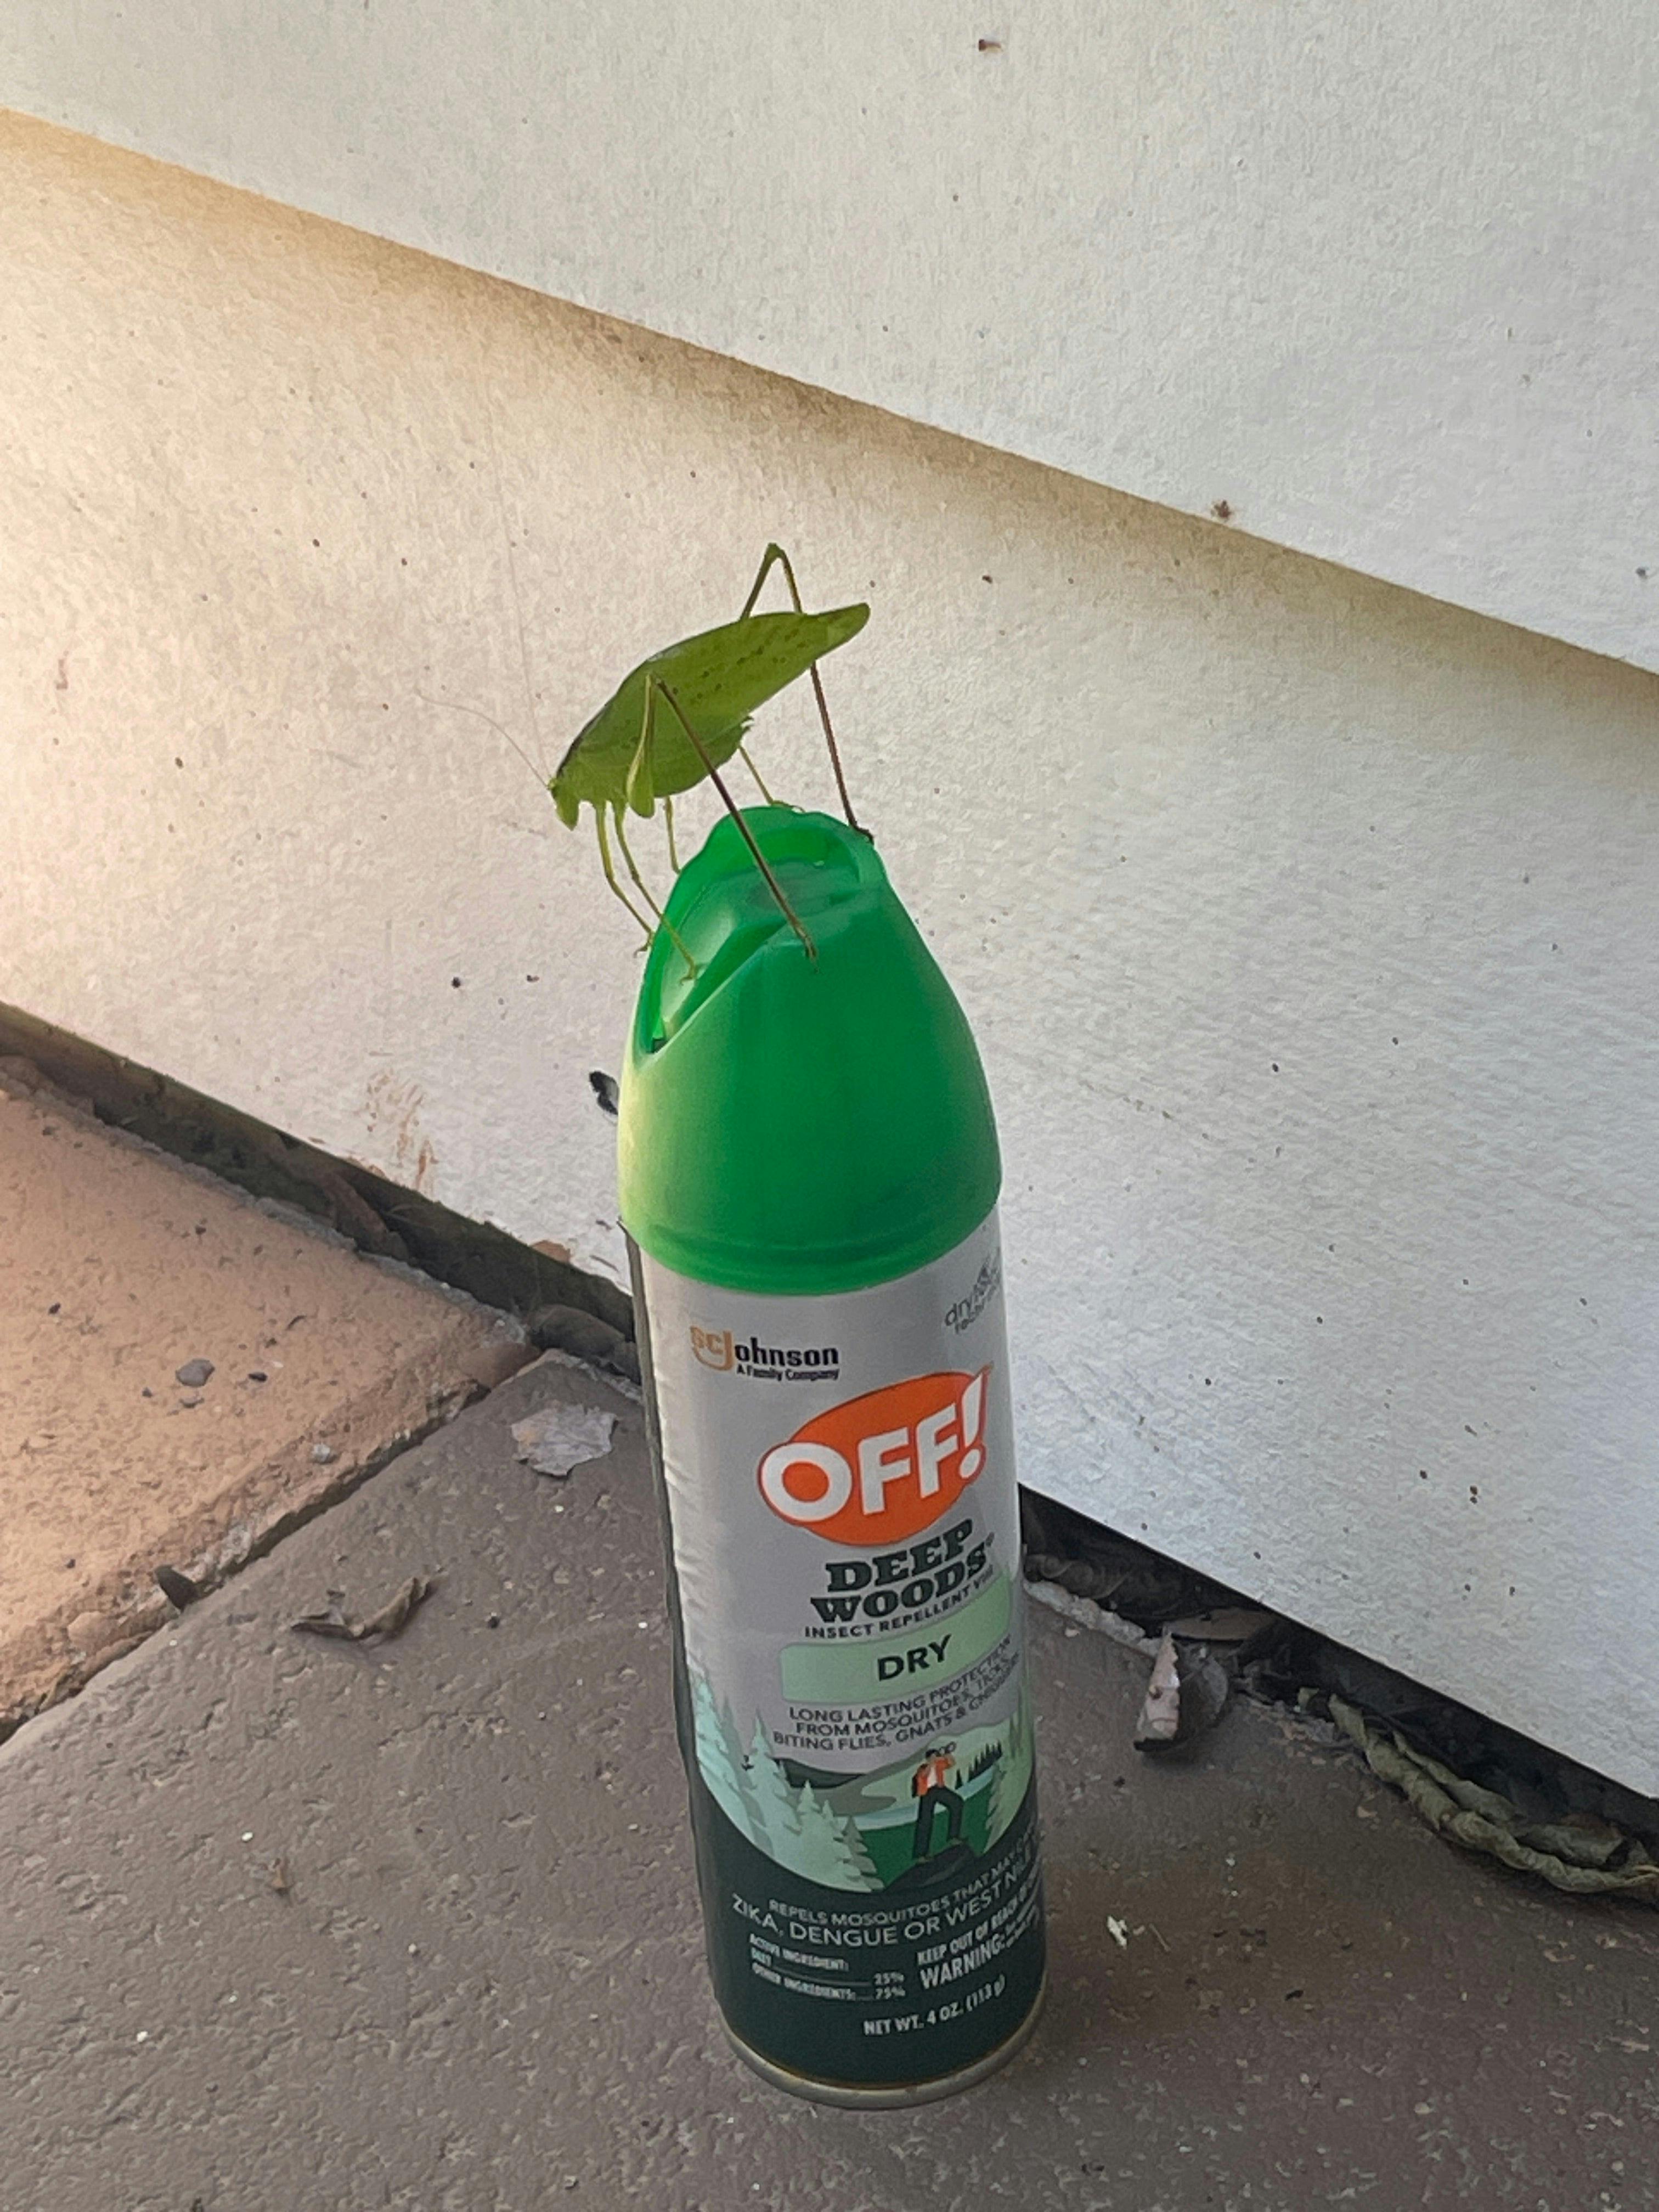 A green cricket is standing on a can of “OFF!” bug spray.